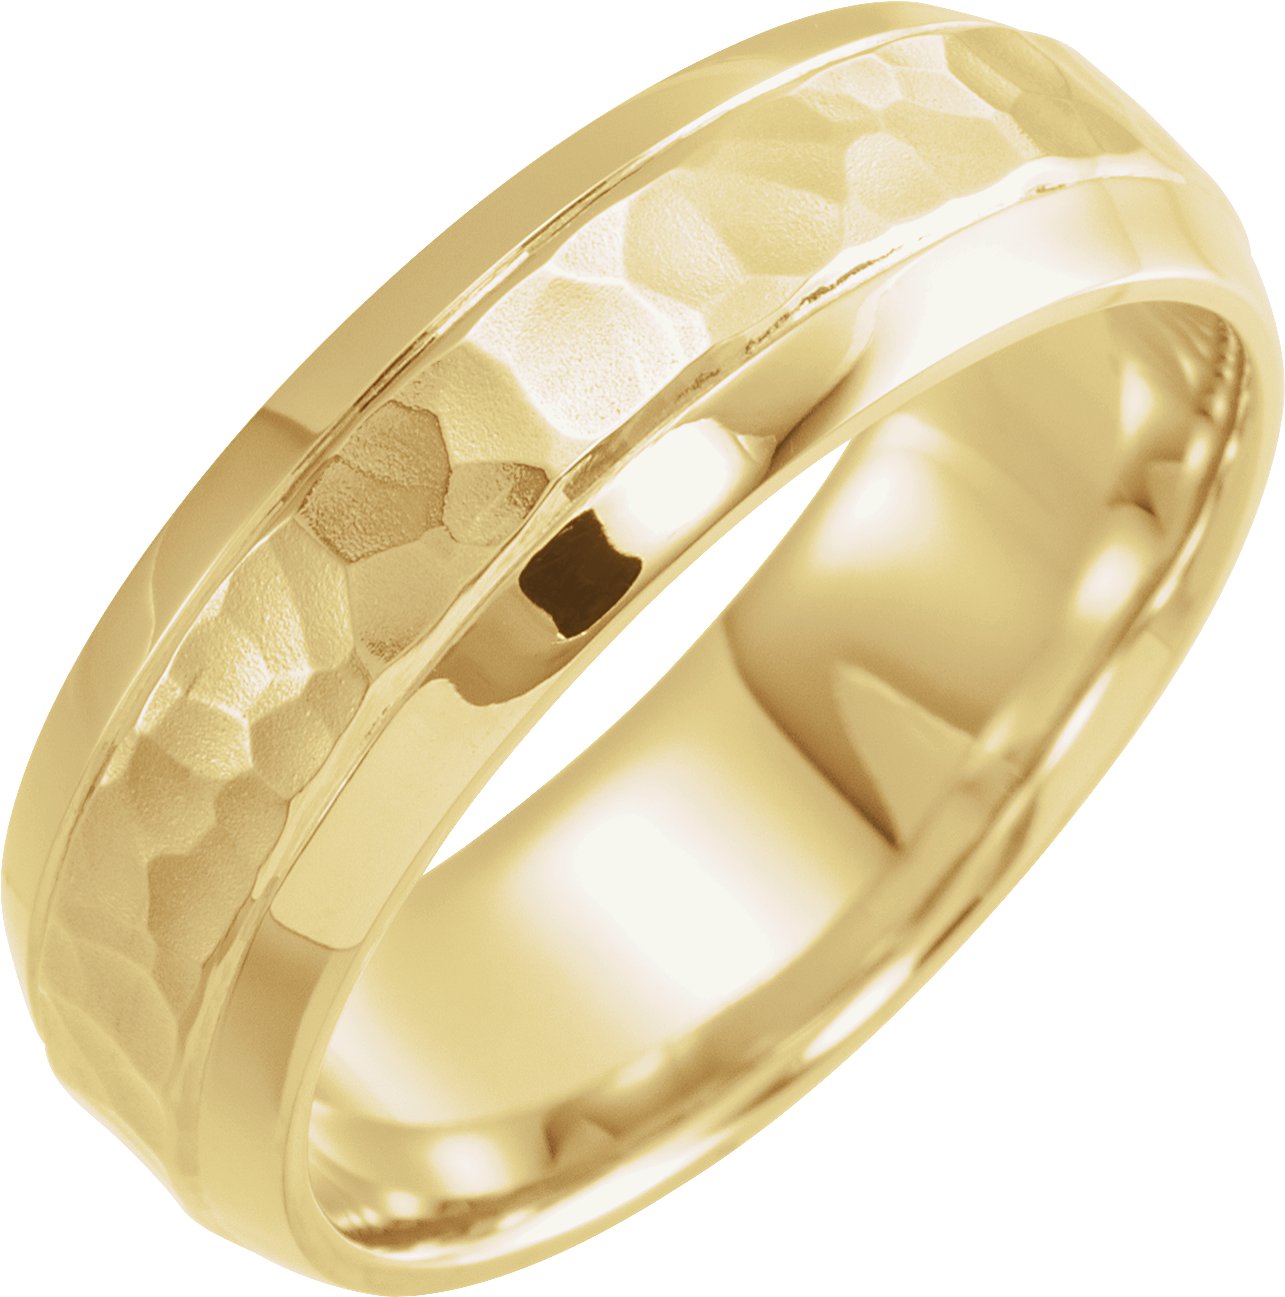 14K Yellow 7 mm Beveled-Edge Band with Hammered Texture Size 12